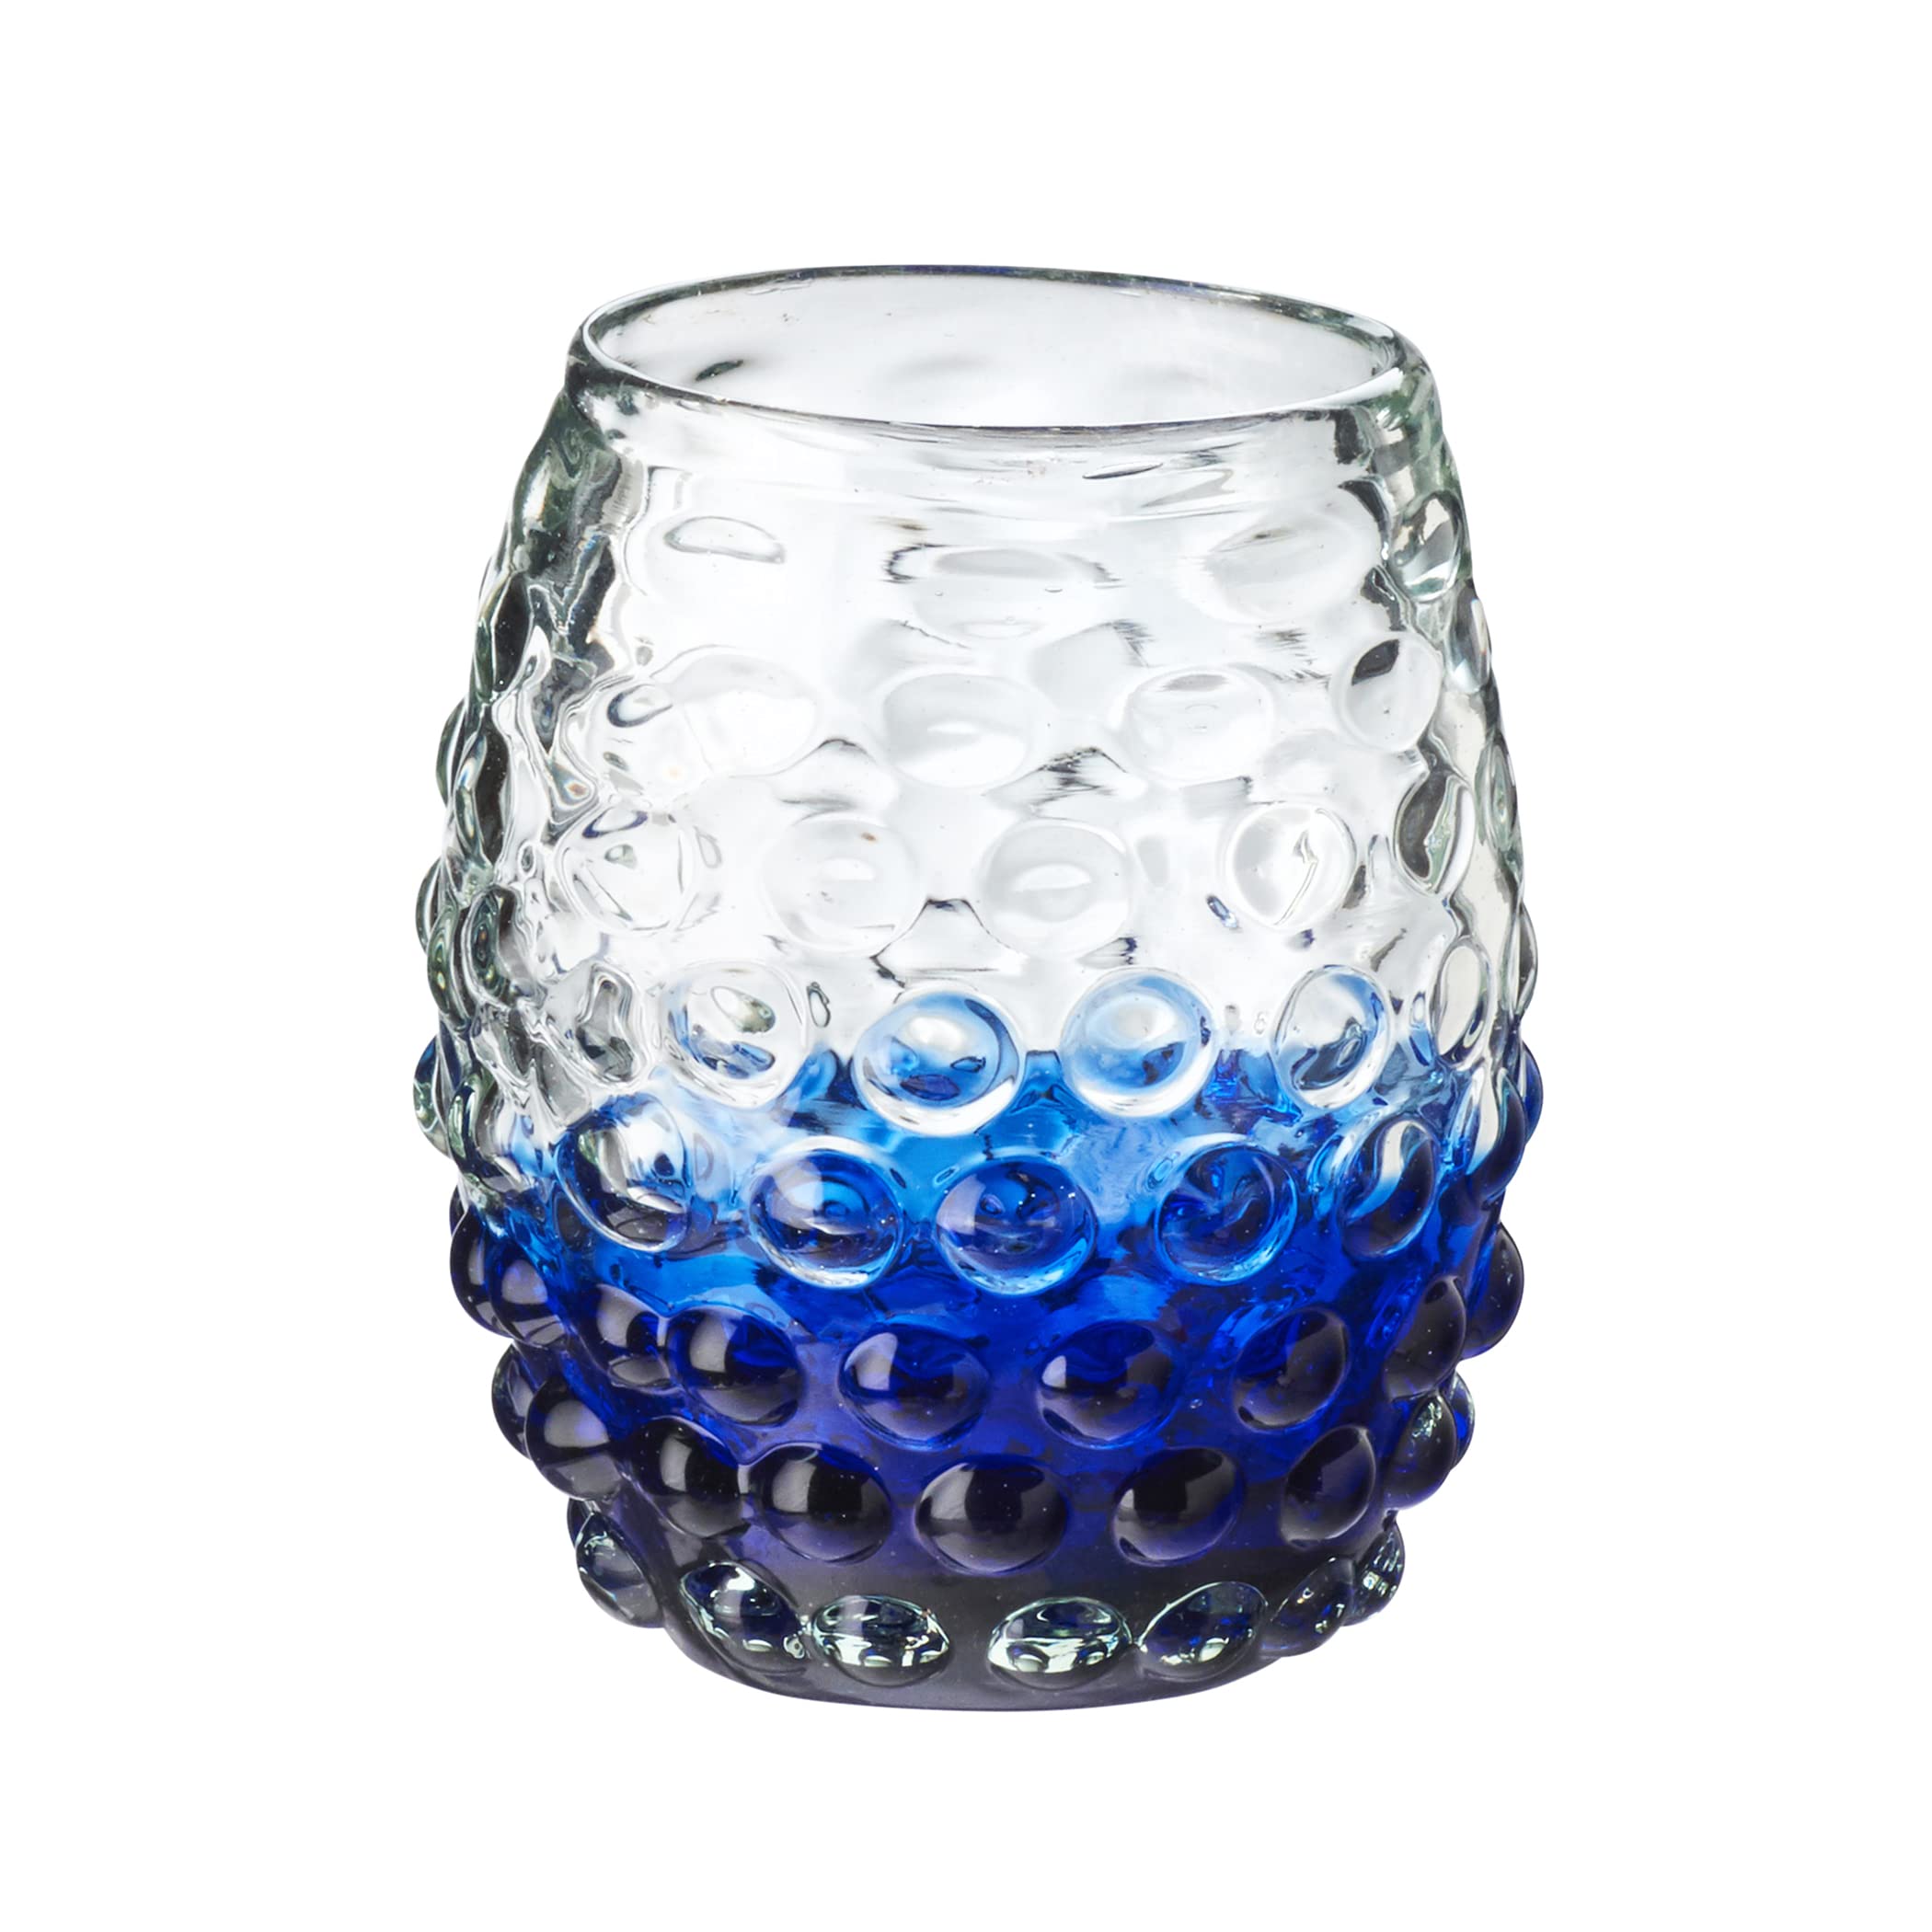 Amici Home-Catalina Double Old-Fashioned (DOF) Glass, Cobalt, Artisan Handmade Mexican Recycled Glass, 3.5” D x 4.25” H, 12- Ounce, Made in Mexico-Set of 4